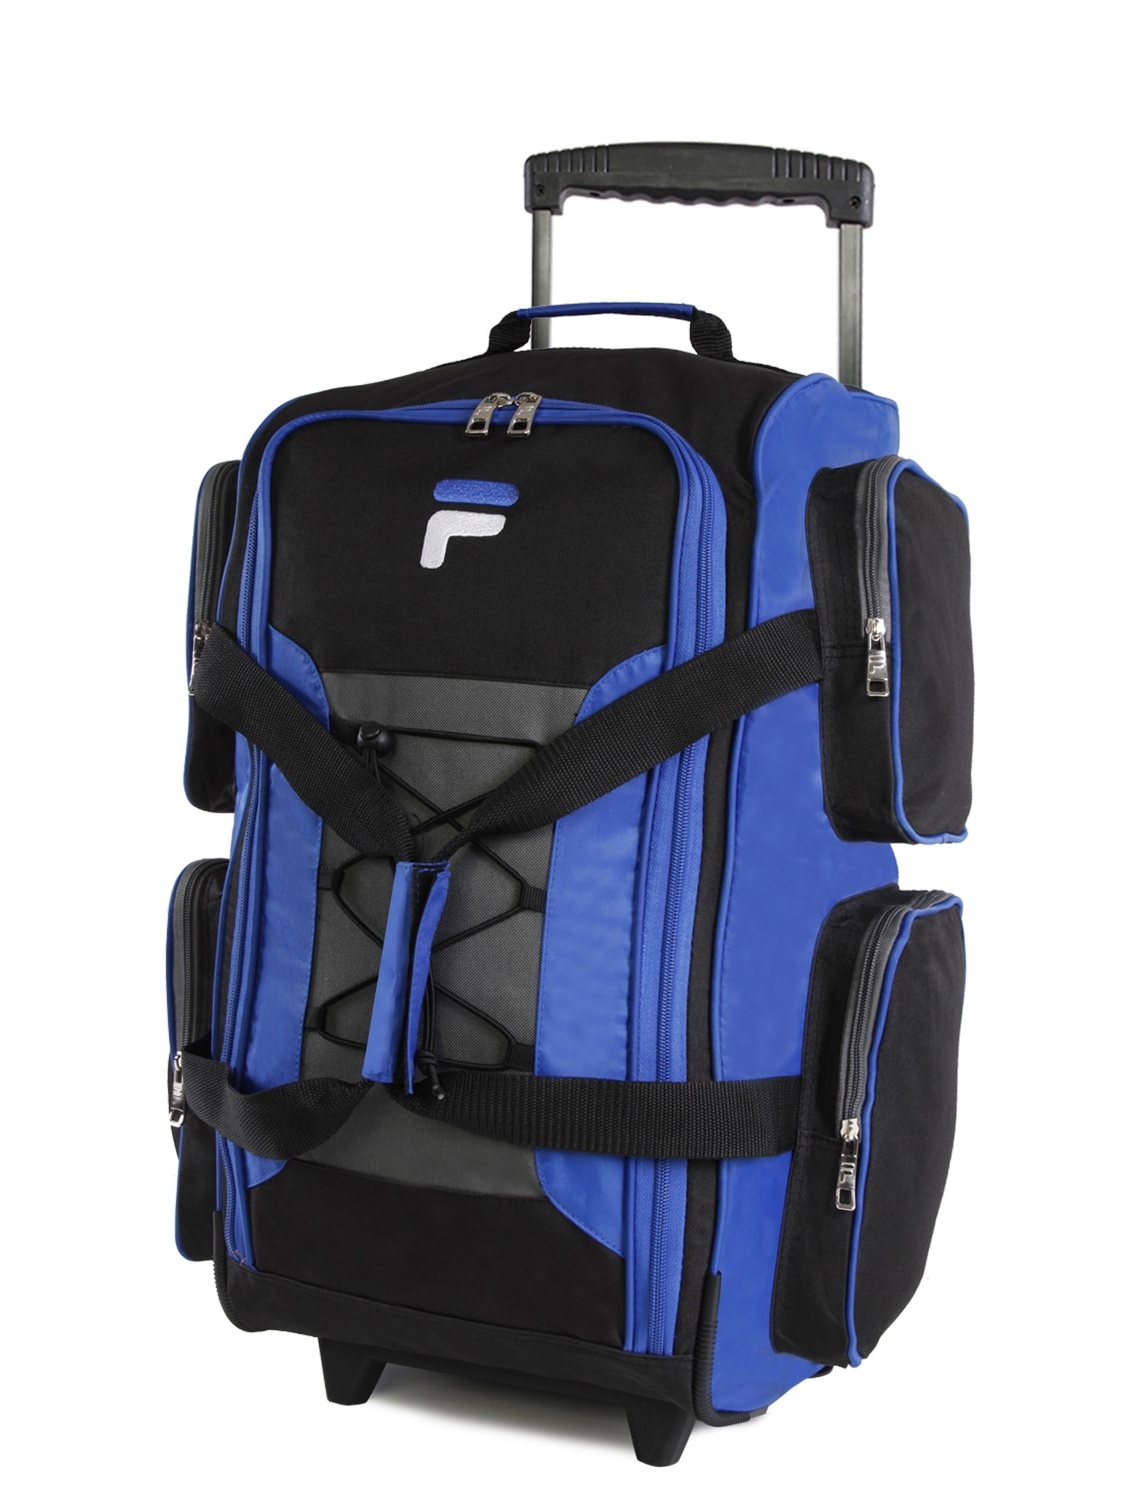 22-inch Lightweight Carry-on Rolling Duffel Bag - image 2 of 5